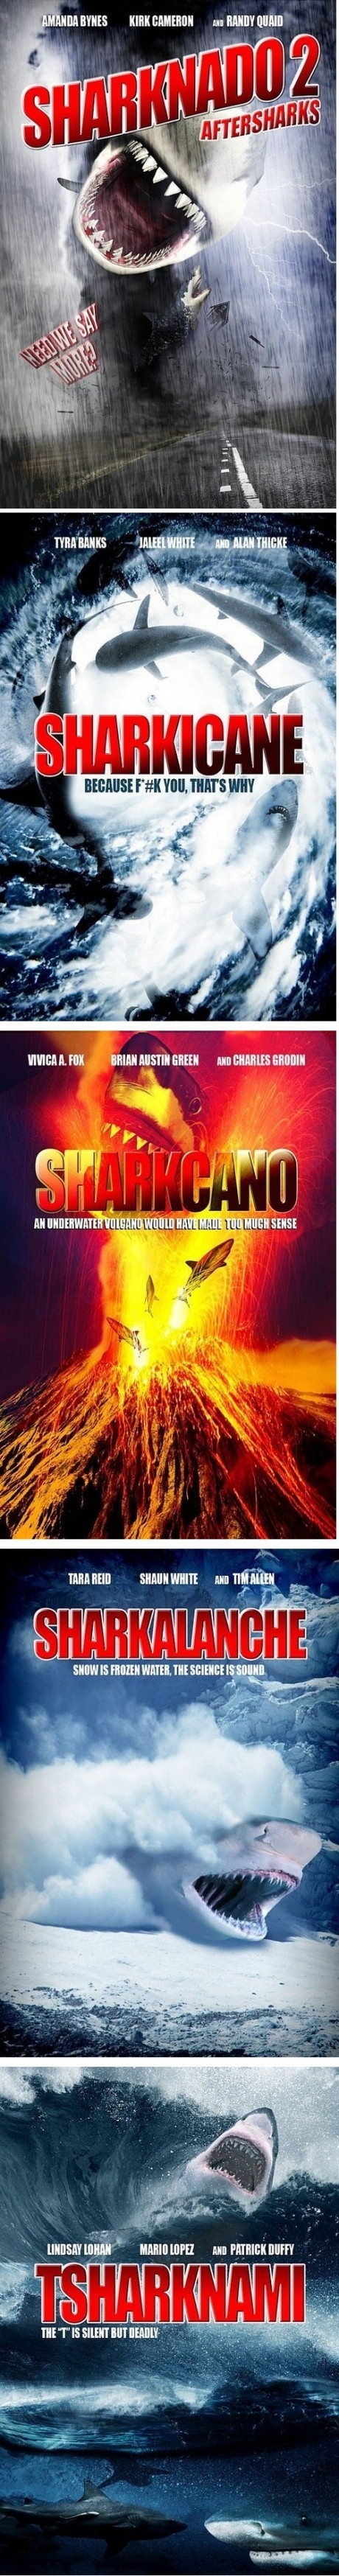 Possible sequels to Sharknado